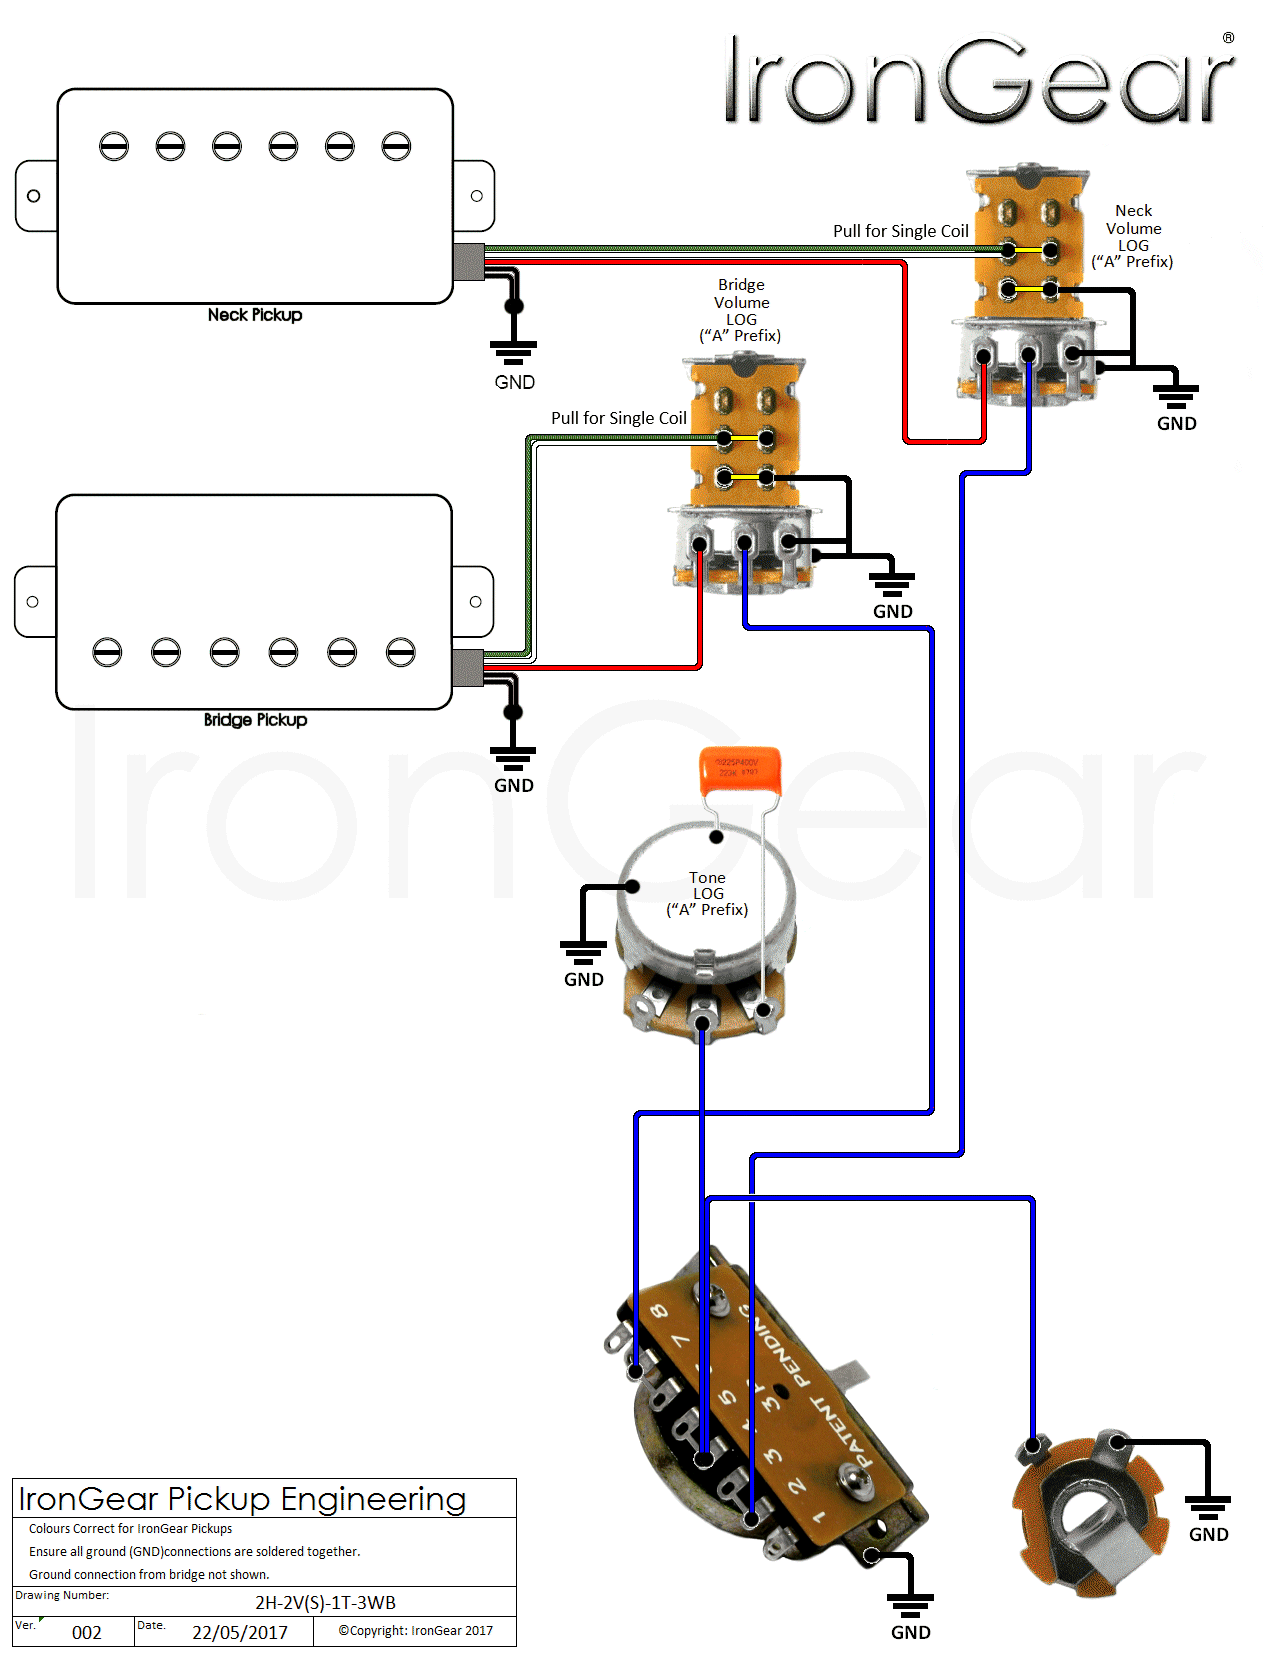 Wiring Diagram For Vintage 2 Humbucker Telecaster from www.irongear.co.uk